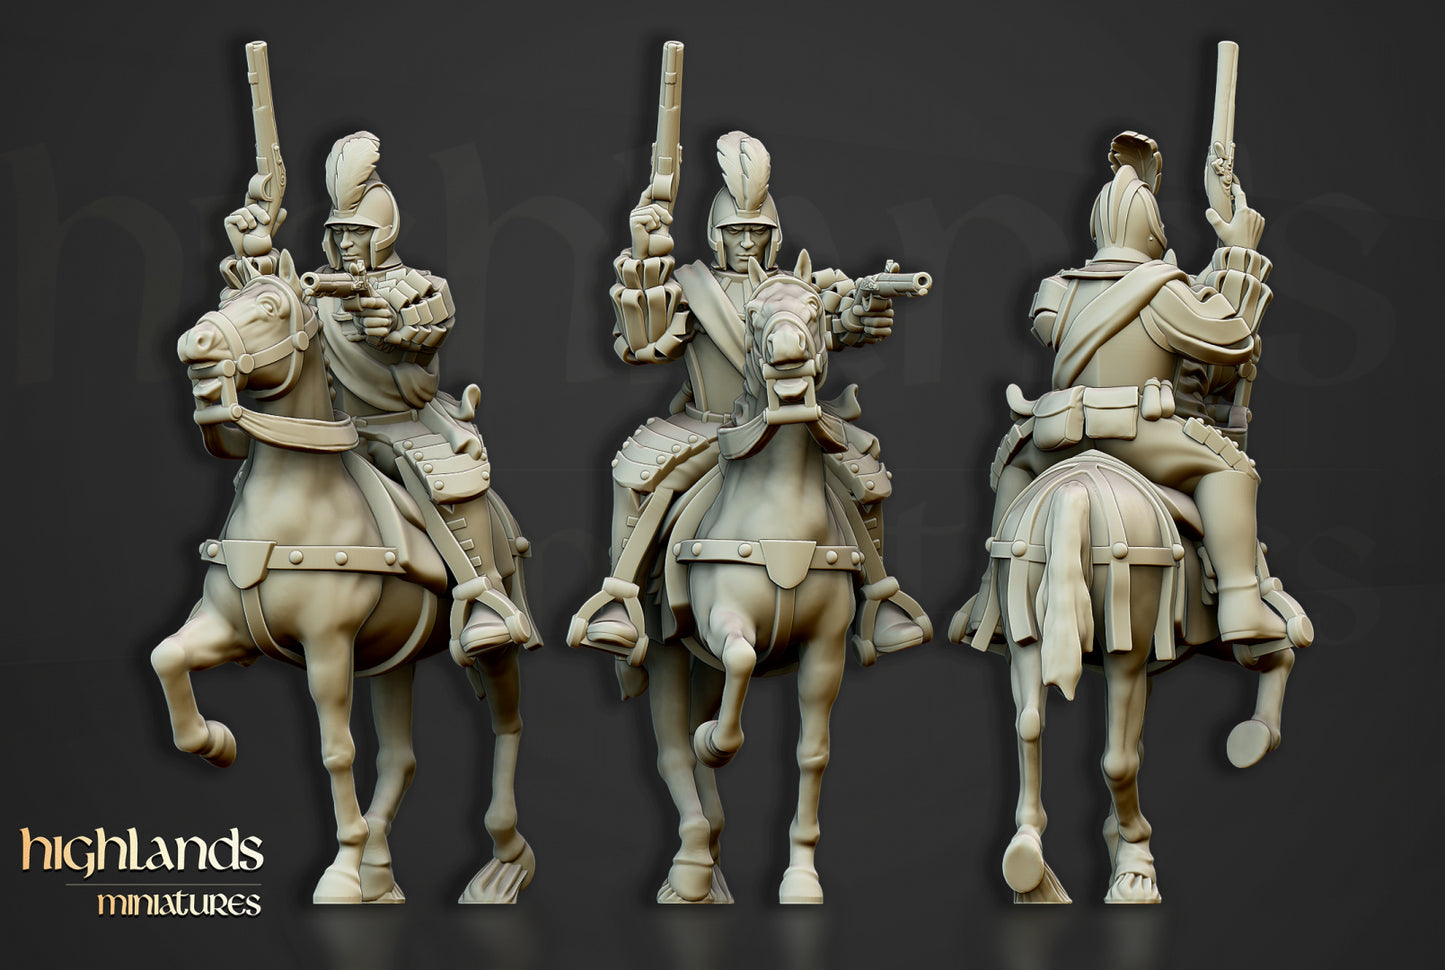 The Black Riders by Highlands Miniatures,